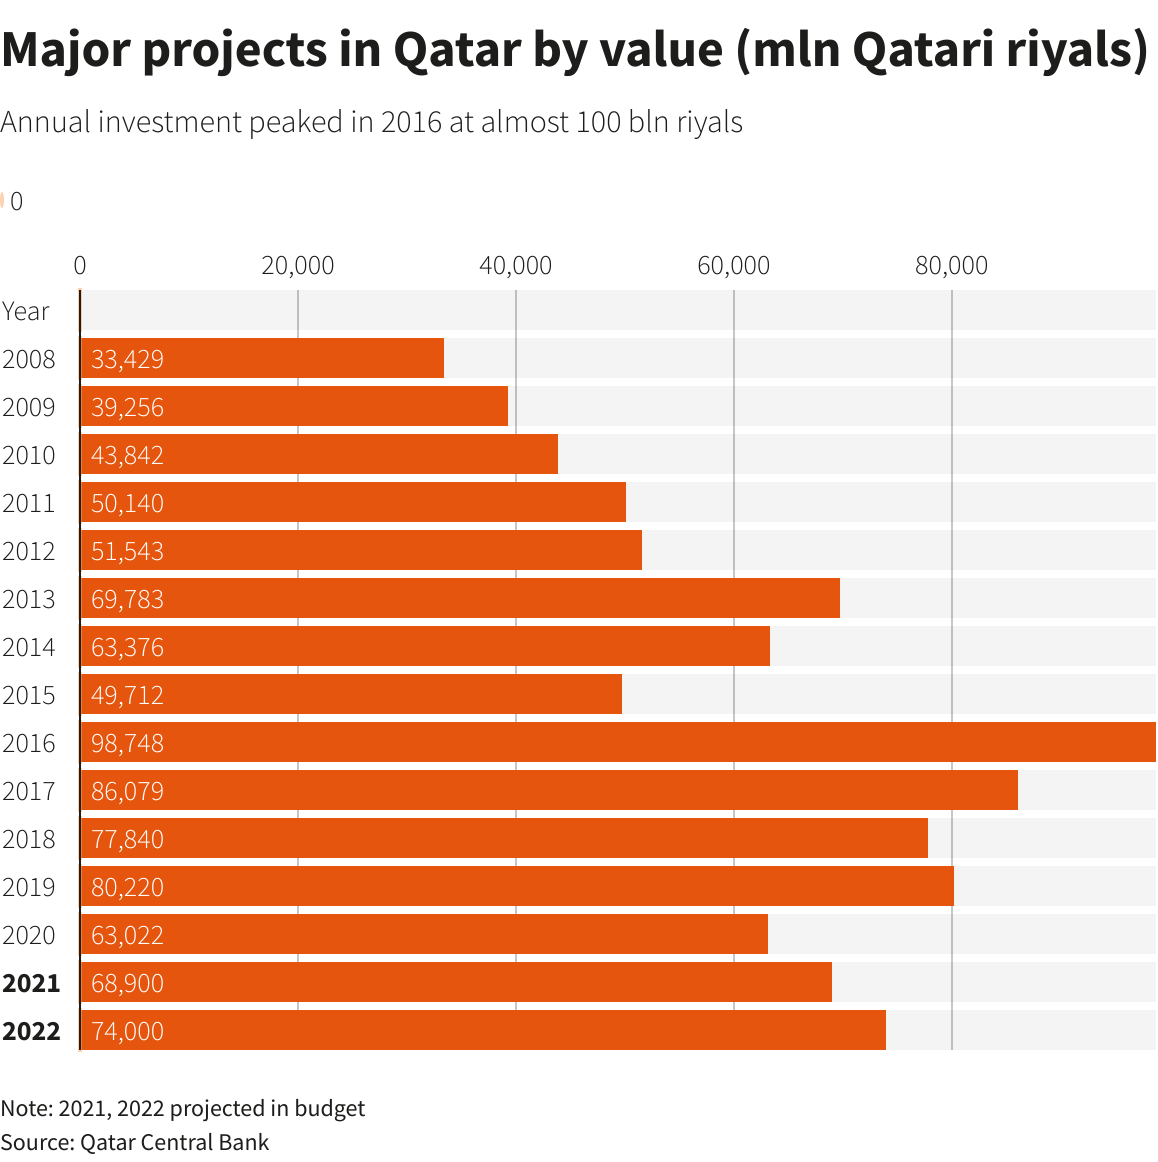 Major projects in Qatar by value